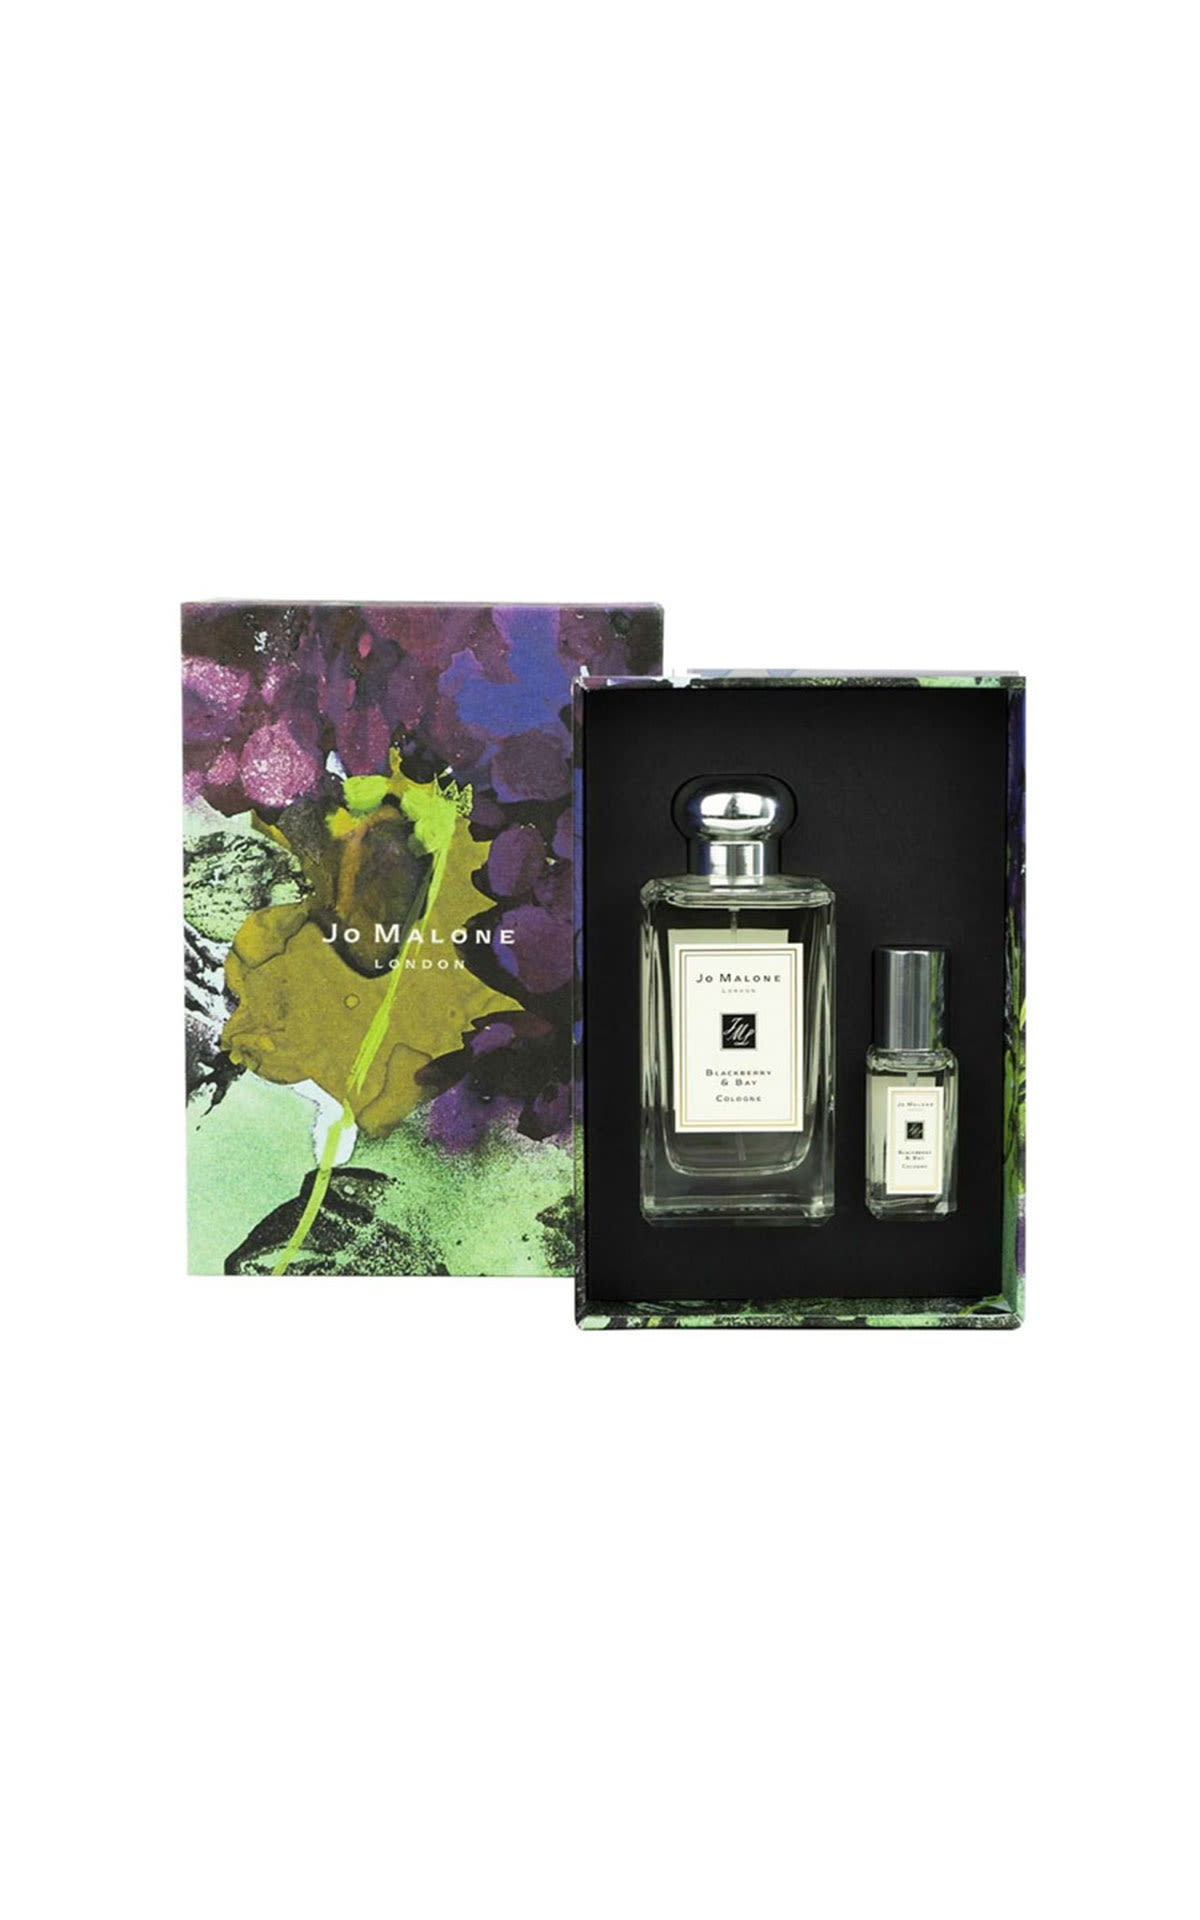 Jo Malone London Blackberry and bay cologne duo from Bicester Village